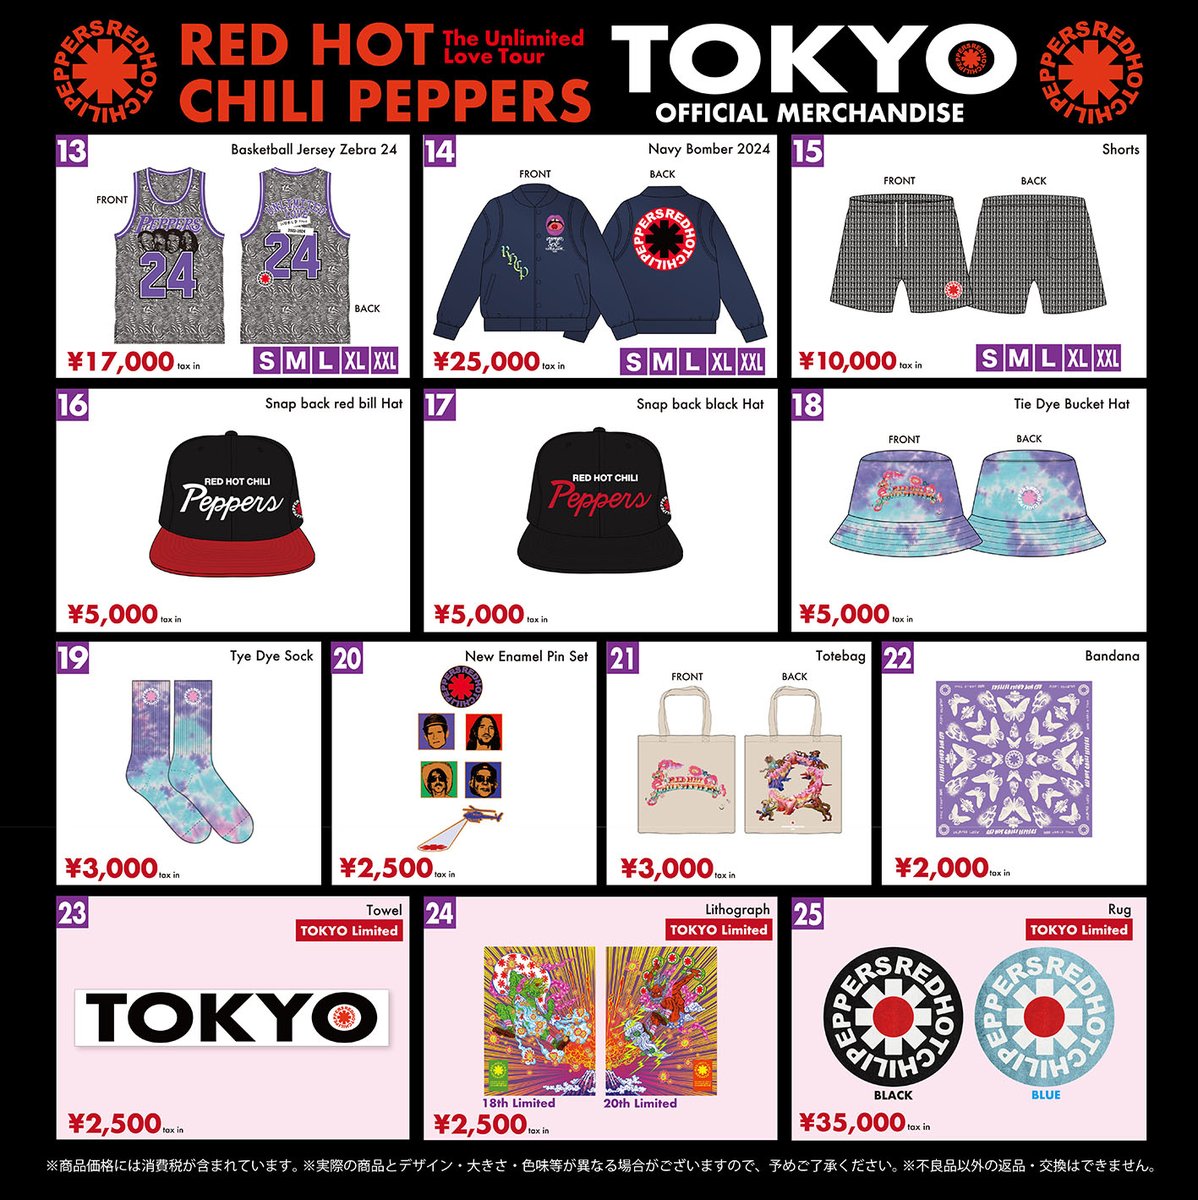 【RED HOT CHILI PEPPERS The Unlimited Love Tour】公演グッズを会場にて販売❗️

詳細は公演特設サイトへ⏩ hipjpn.co.jp/live/rhcp2024/

#redhotchilipeppers #レッチリ #来日 #東京ドーム #ドーム公演 #HIP